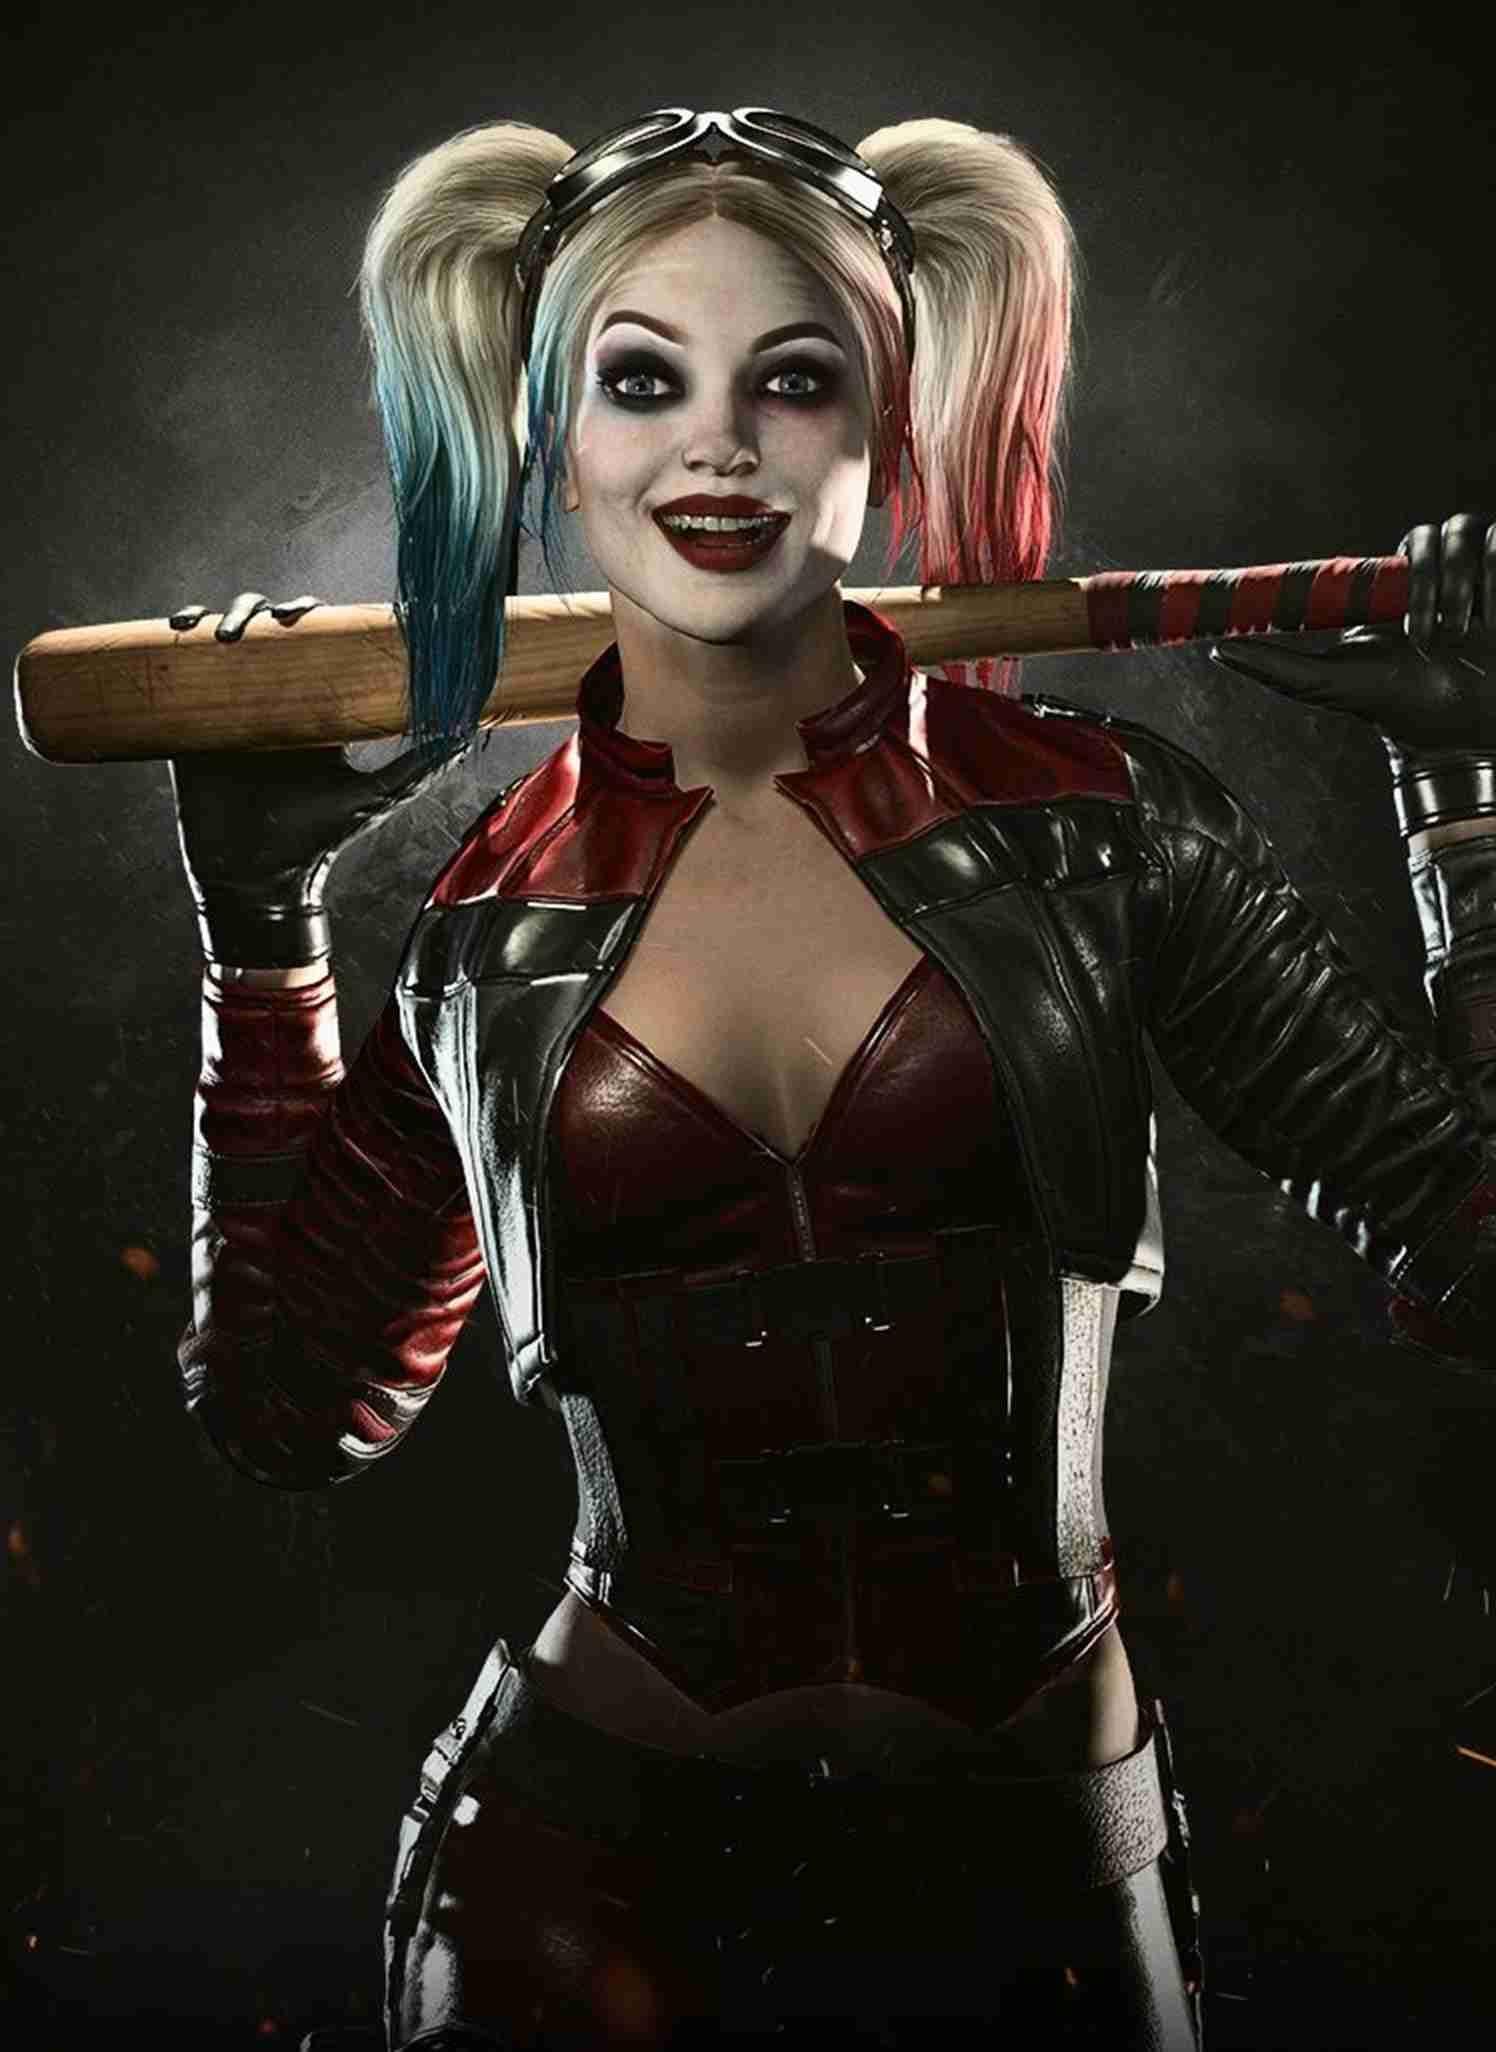 Harley Quinn Injustice 2 Wallpapers - Top Free Harley Quinn Injustice 2 ...